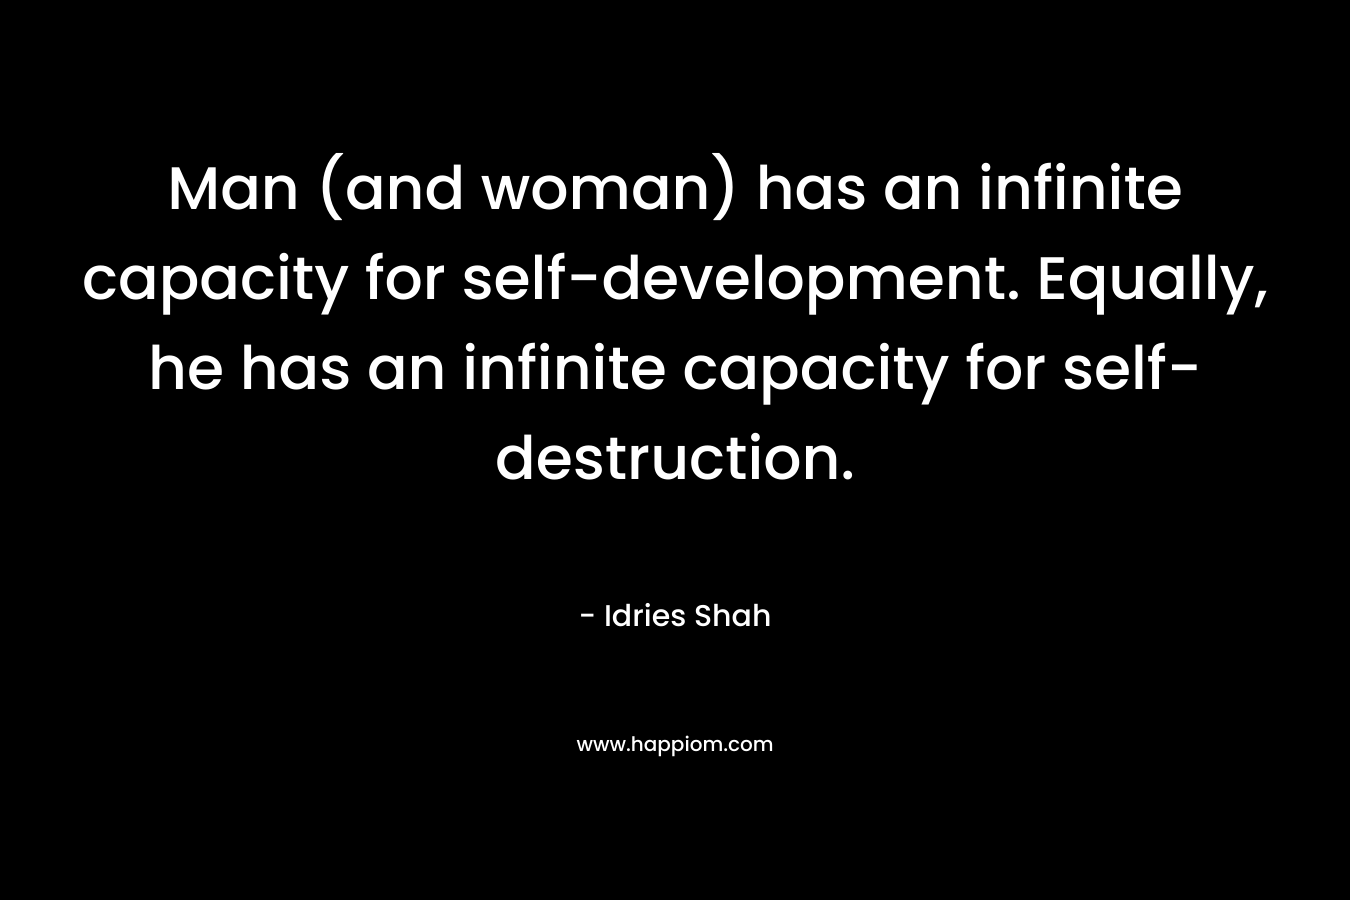 Man (and woman) has an infinite capacity for self-development. Equally, he has an infinite capacity for self-destruction. – Idries Shah